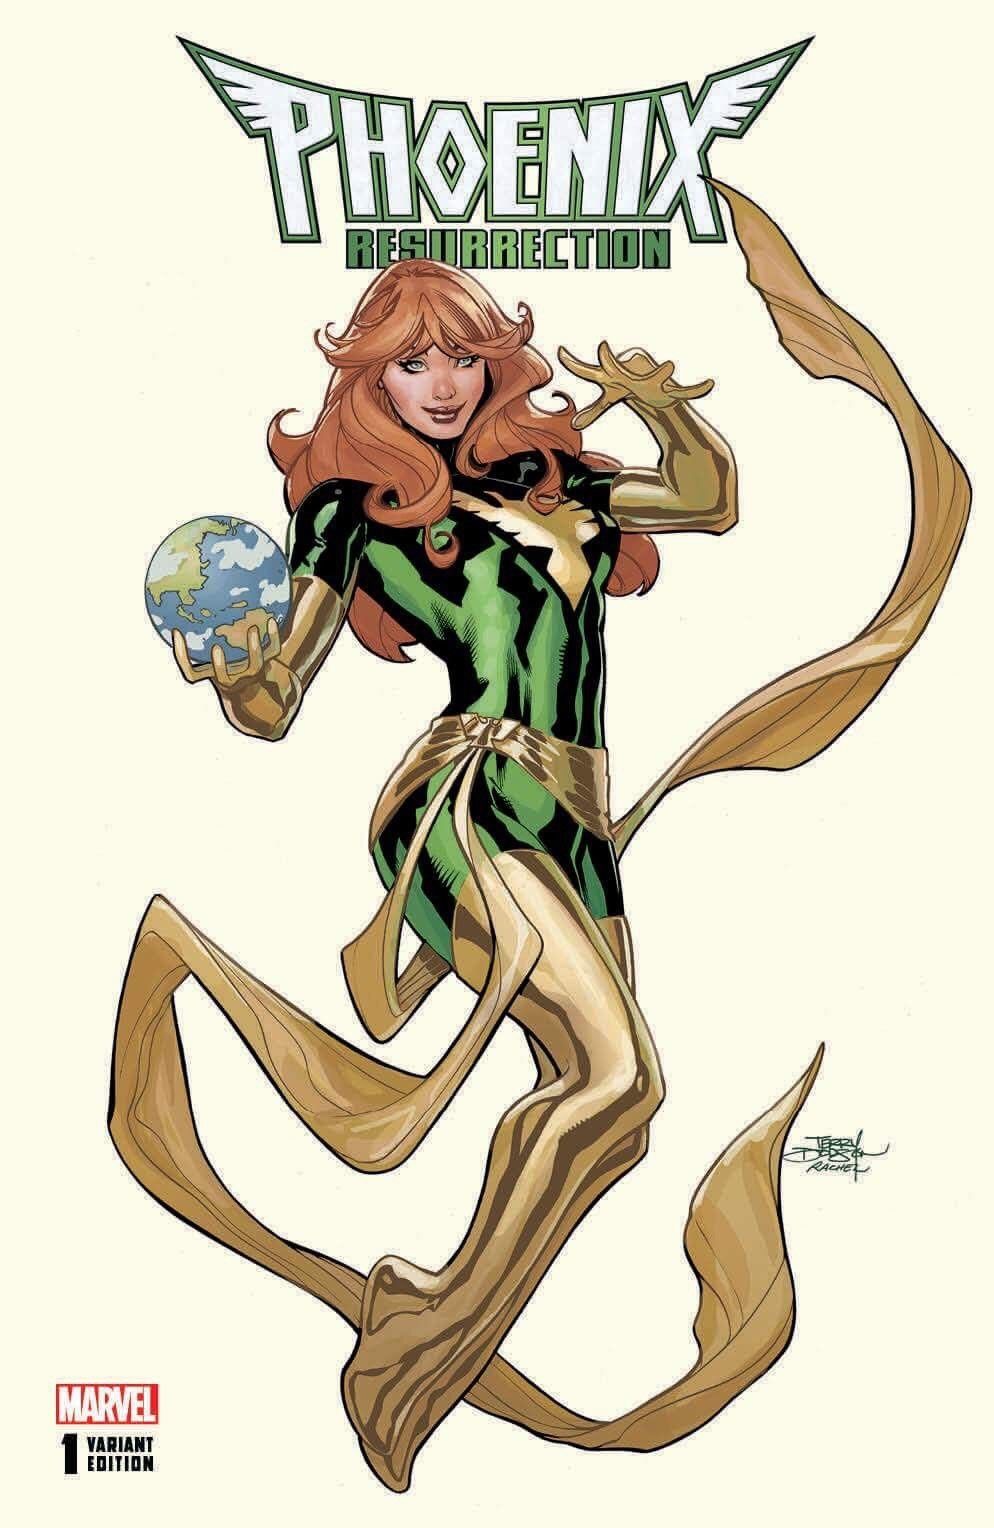 PHOENIX RESURRECTION #1 COVER A - BOOM EXCLUSIVE TERRY DODSON COVER